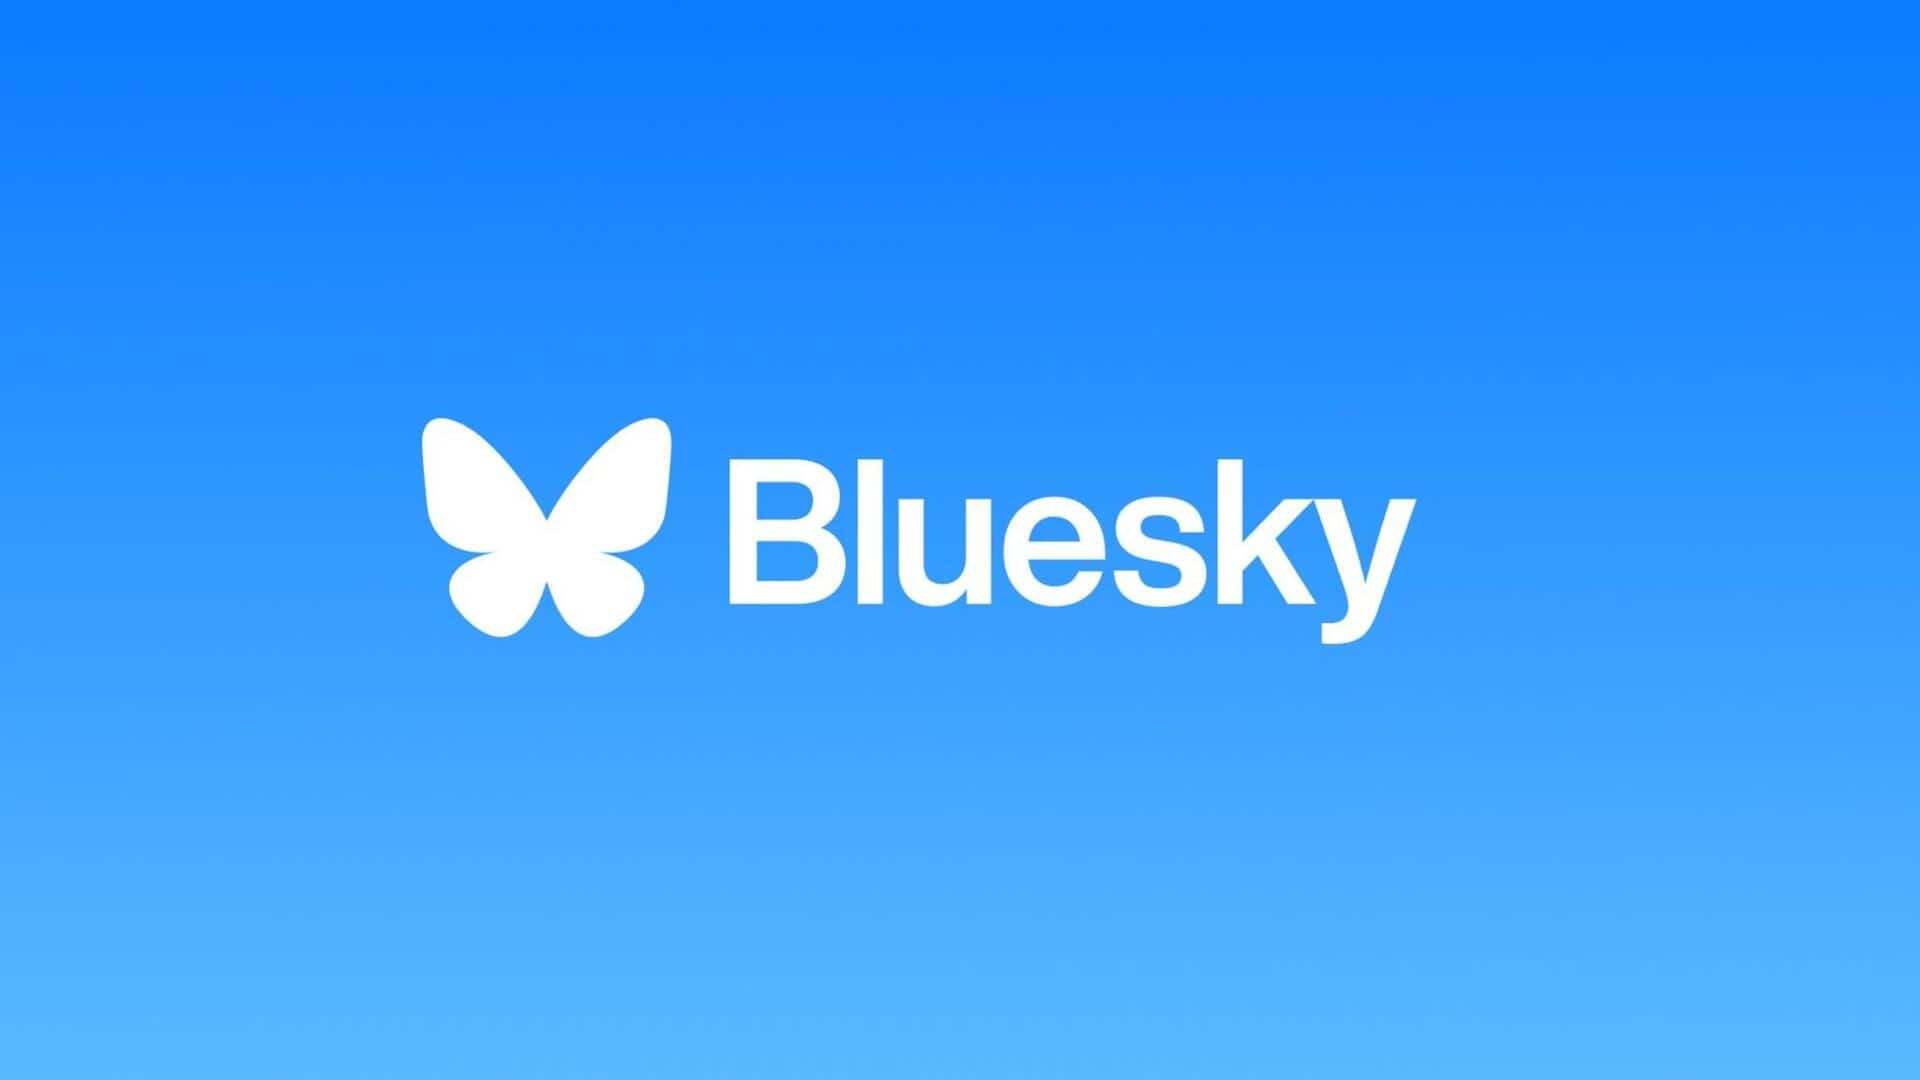 X-rival Bluesky, endorsed by Jack Dorsey, opens to public